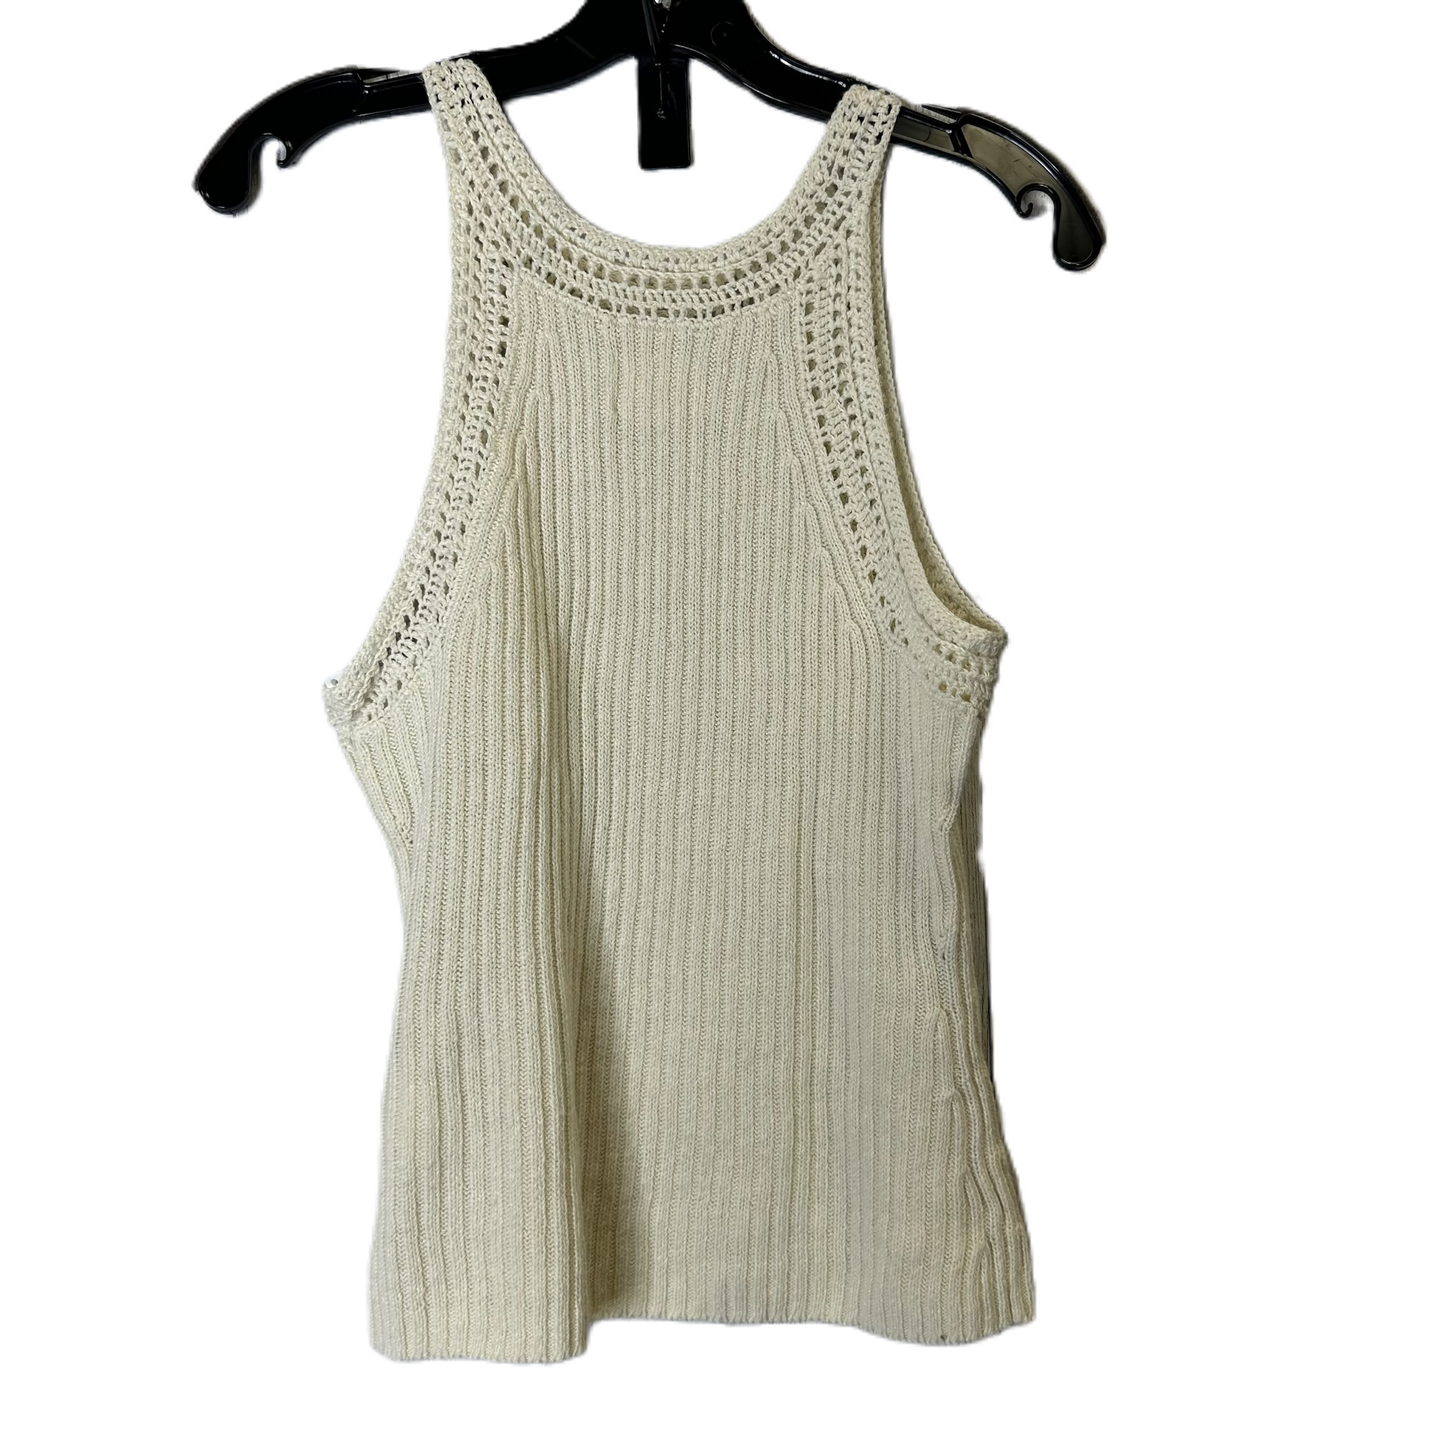 Cream Top Sleeveless By Lucky Brand, Size: S